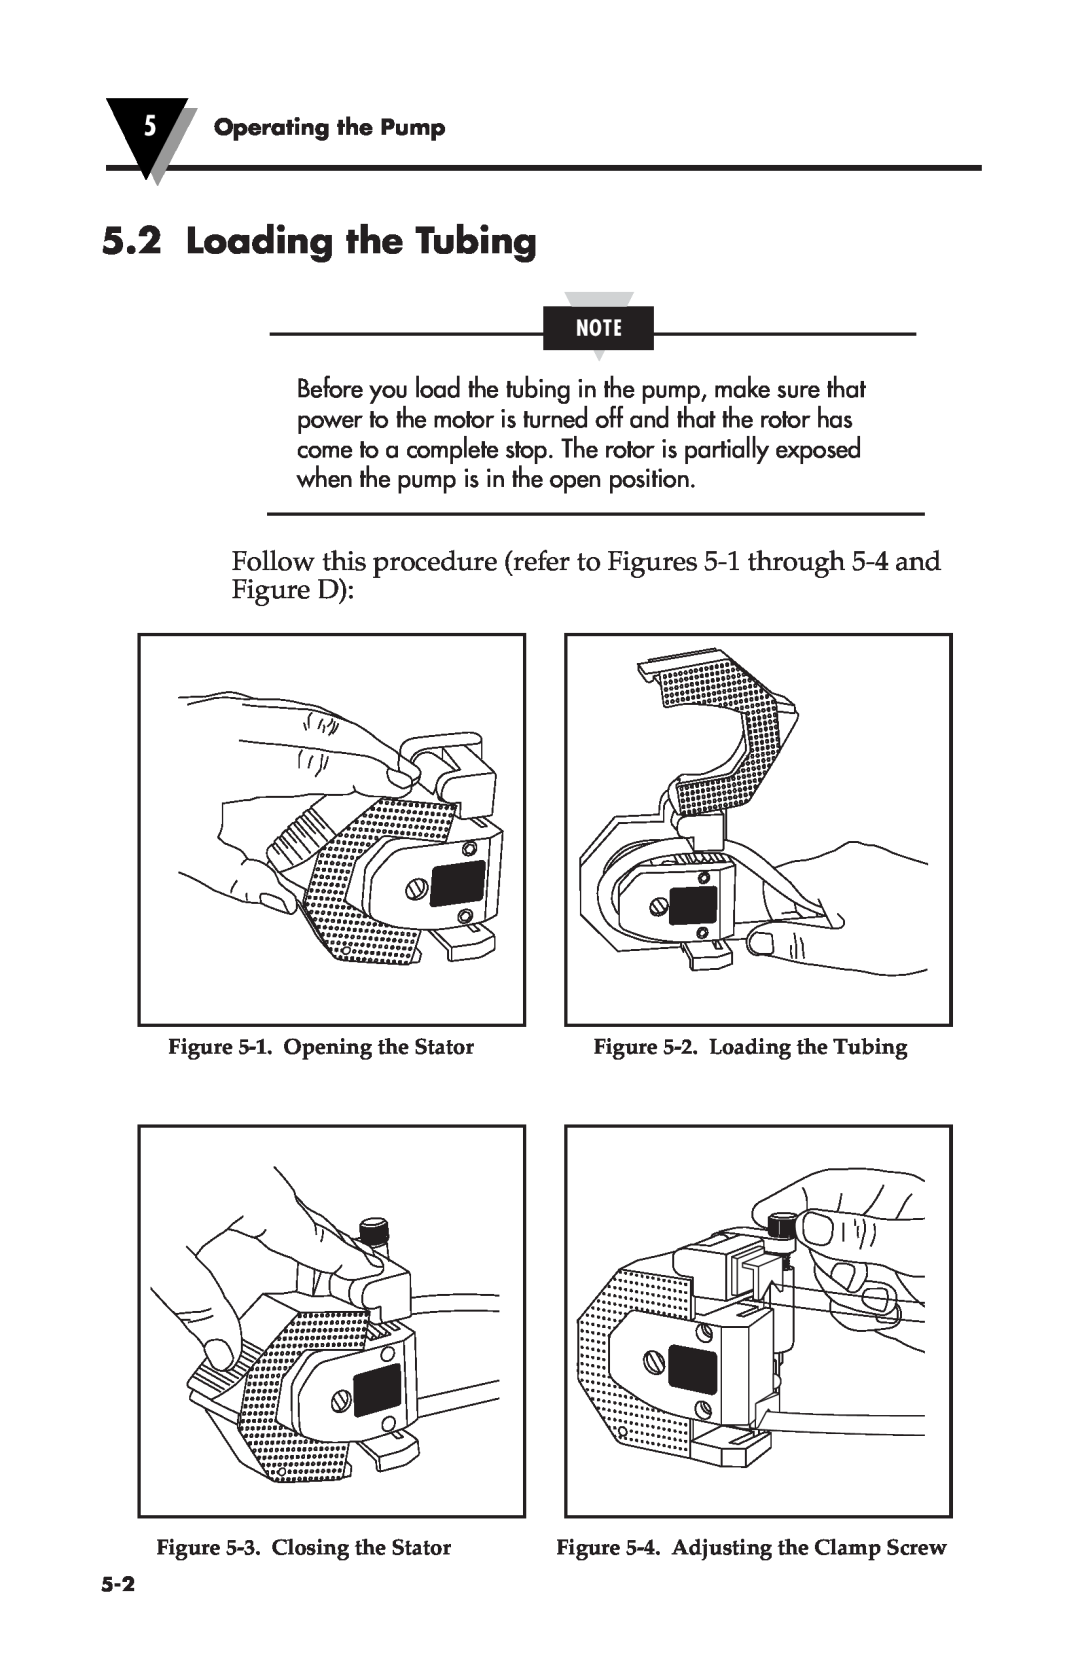 Omega Vehicle Security FPU500 5Operating the Pump, 1.Opening the Stator, 2.Loading the Tubing, 3.Closing the Stator 